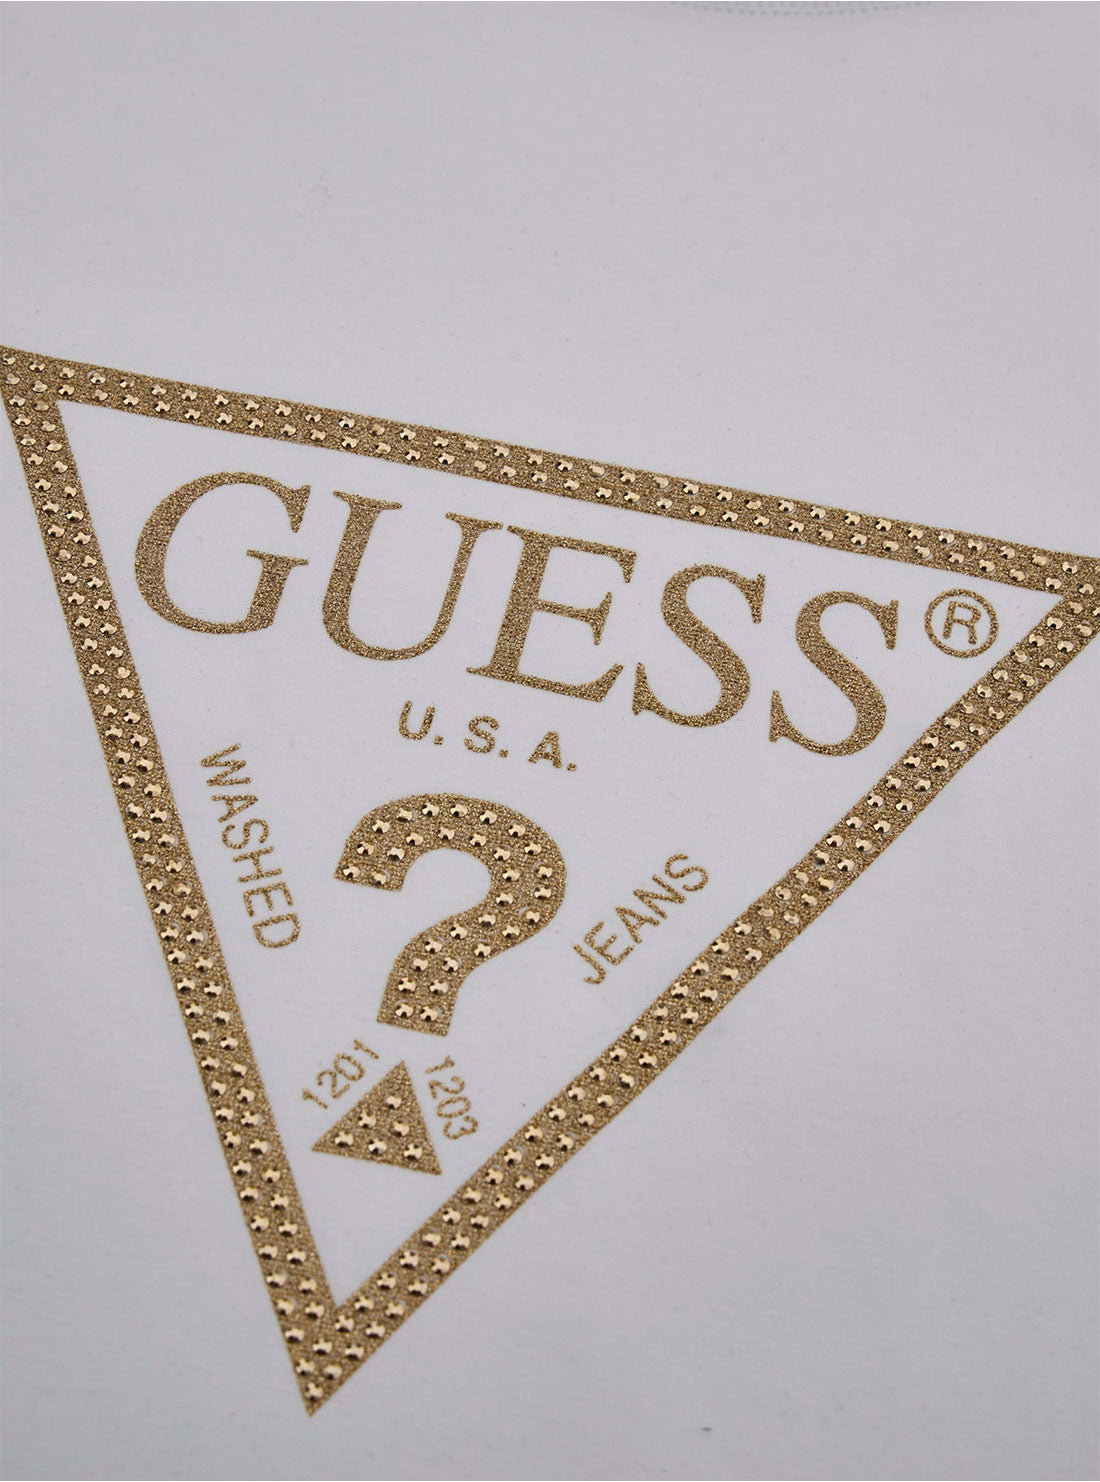 GUESS White Gold Triangle T-Shirt detail view